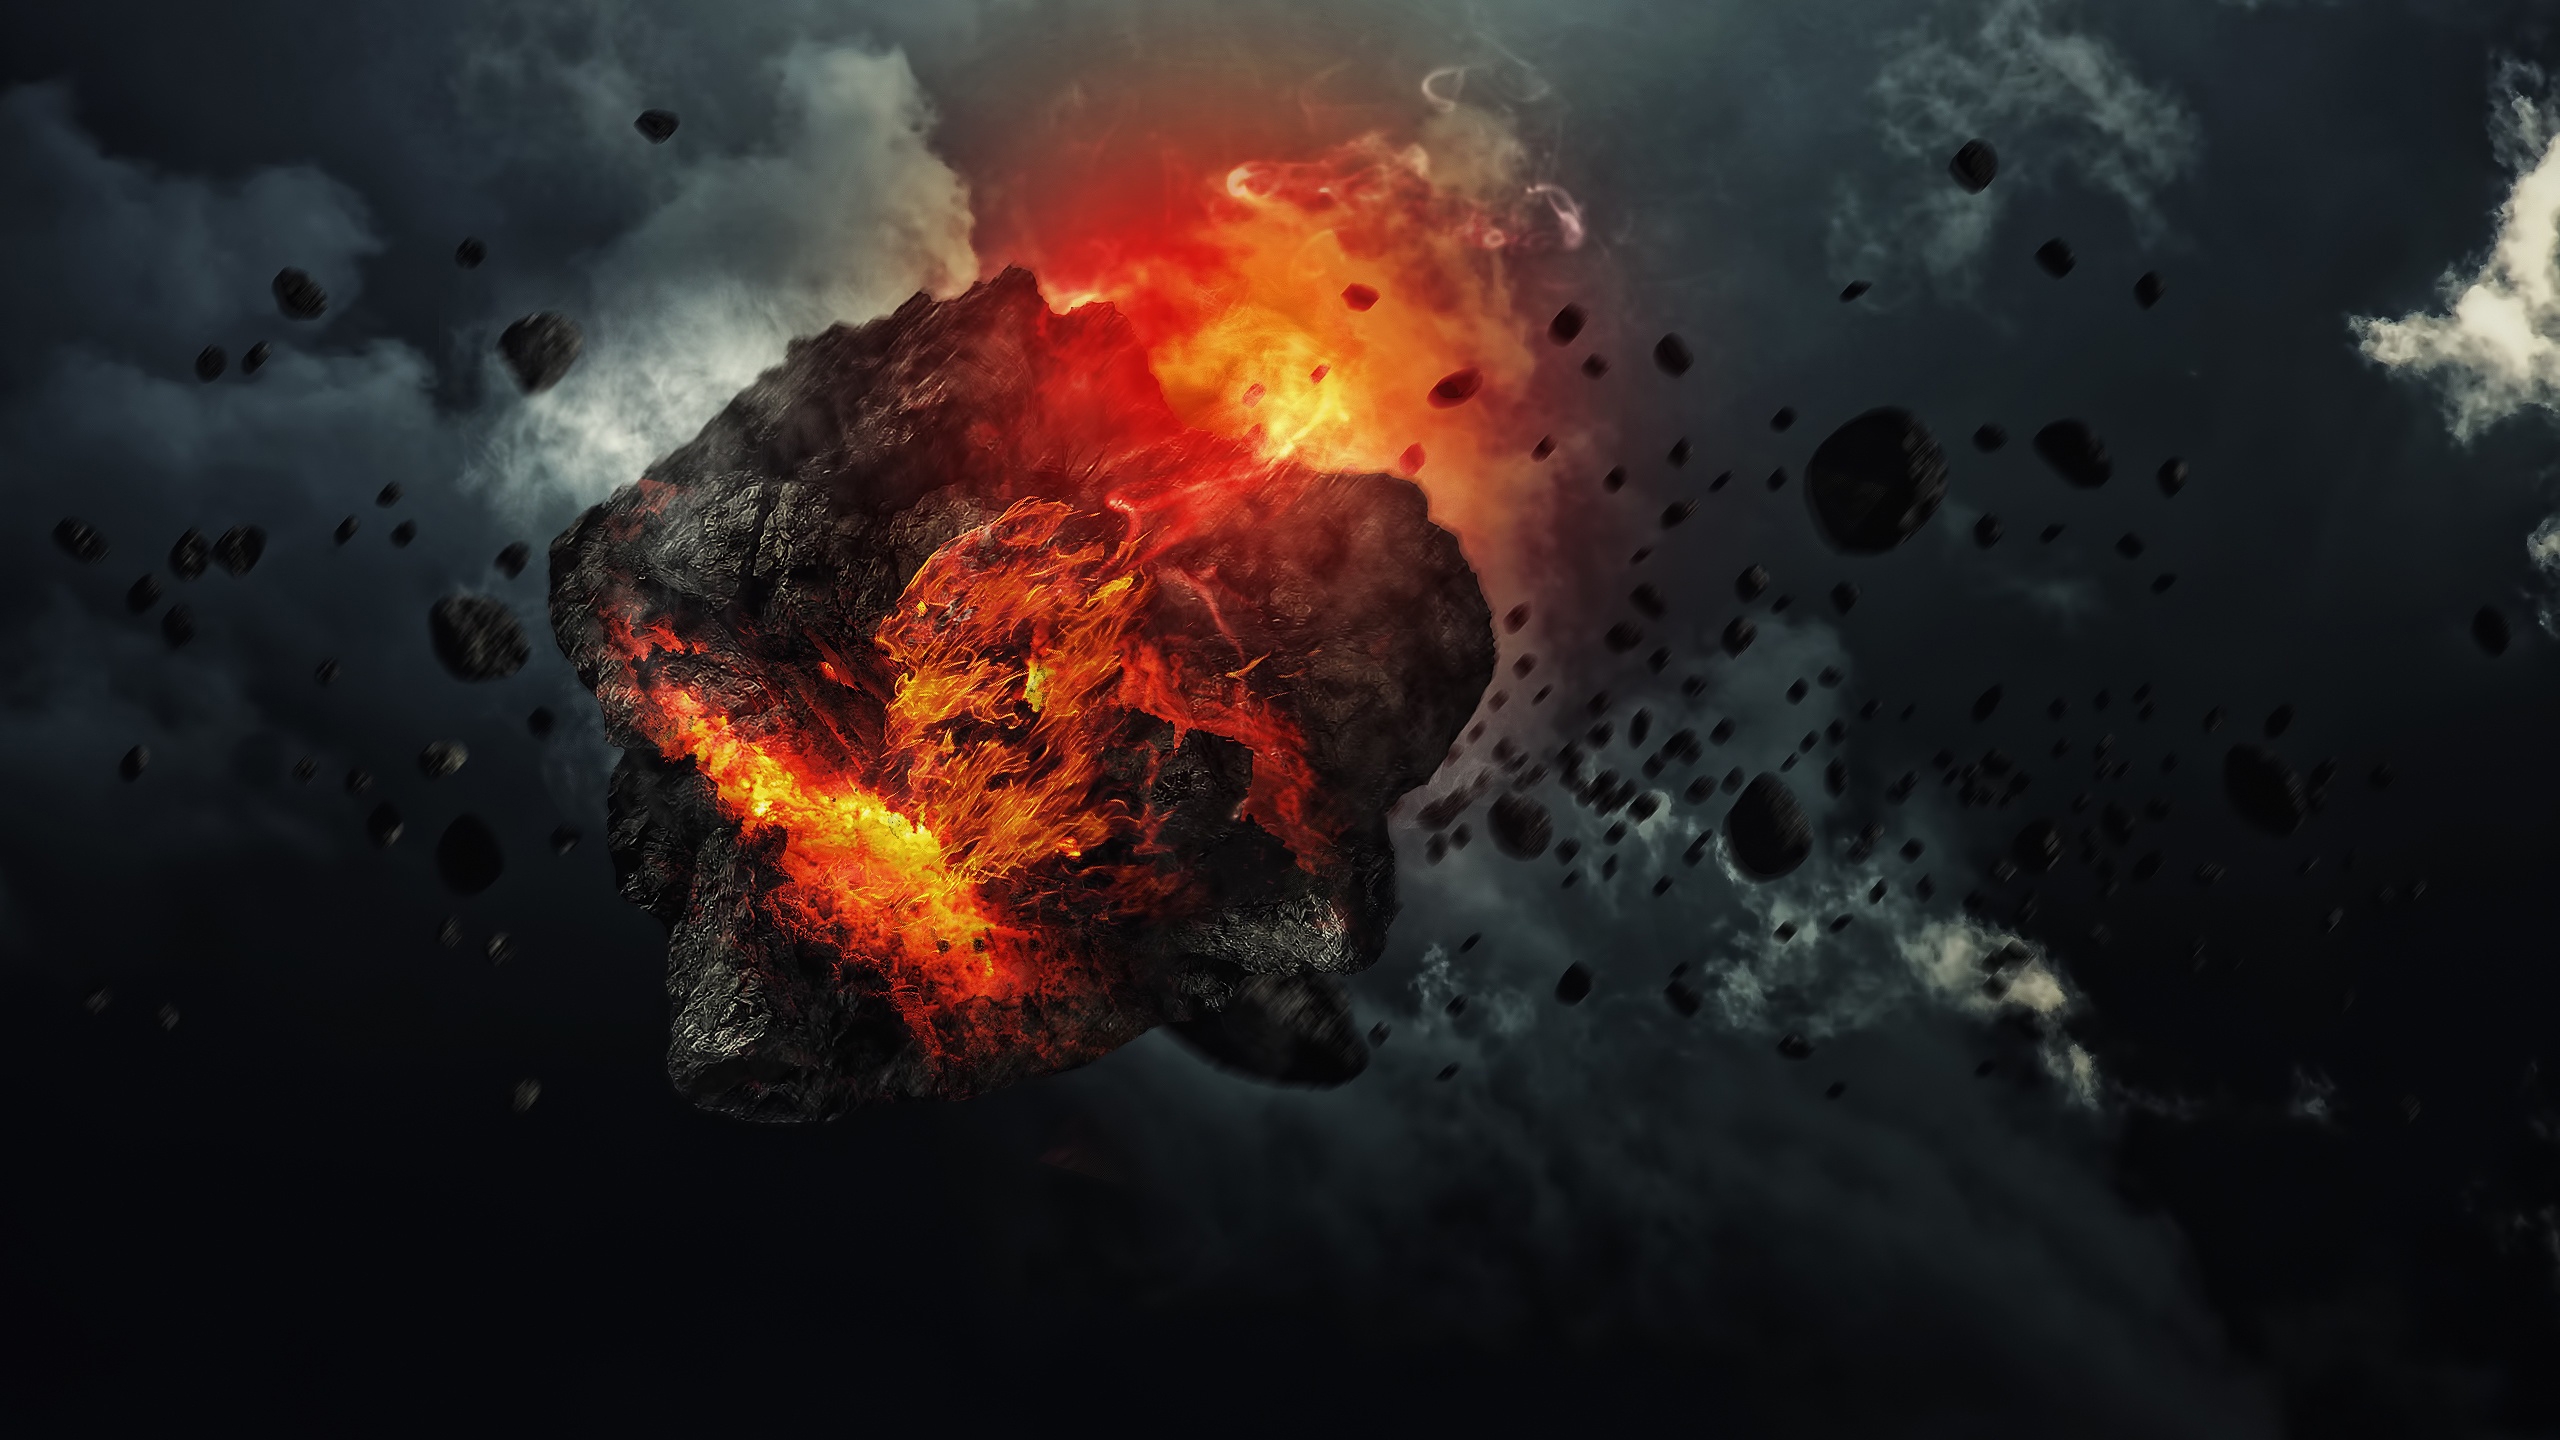 Planet Explosion Radiation Wallpaper Hd Space 4k Wallpapers Images Images